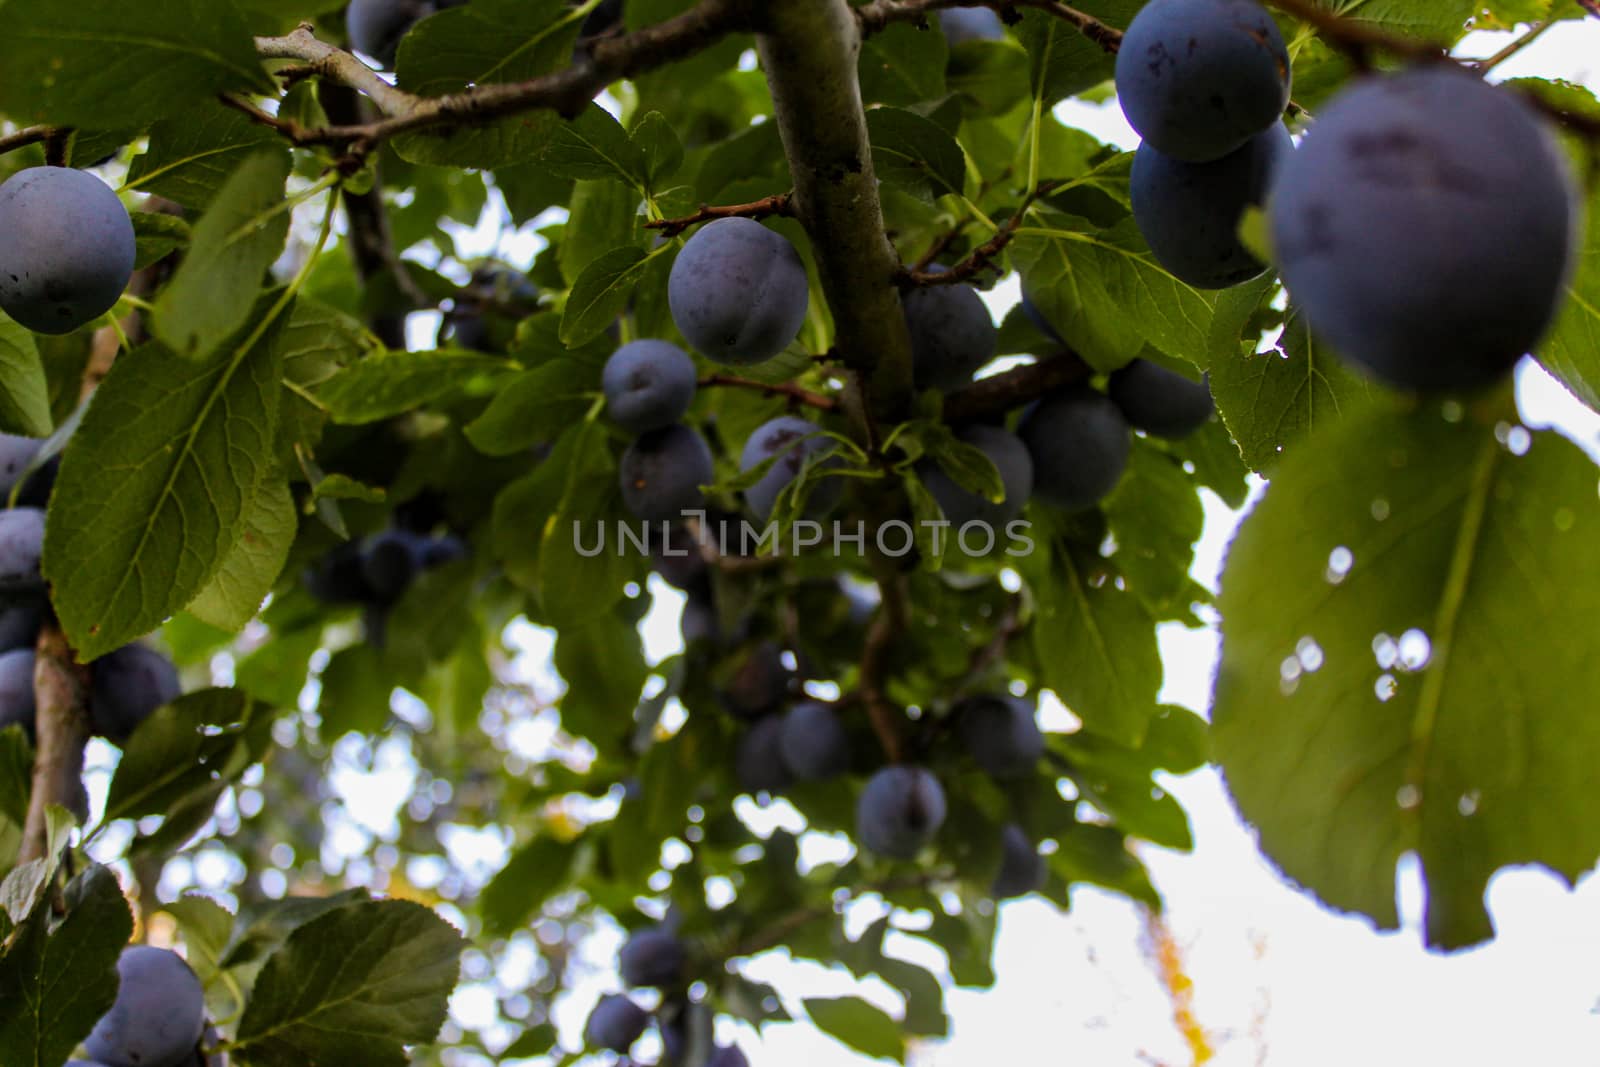 The branch on which the plums are ripe. Plum orchard. Ripe blue plums on a branch. Zavidovići, Bosnia and Herzegovina.